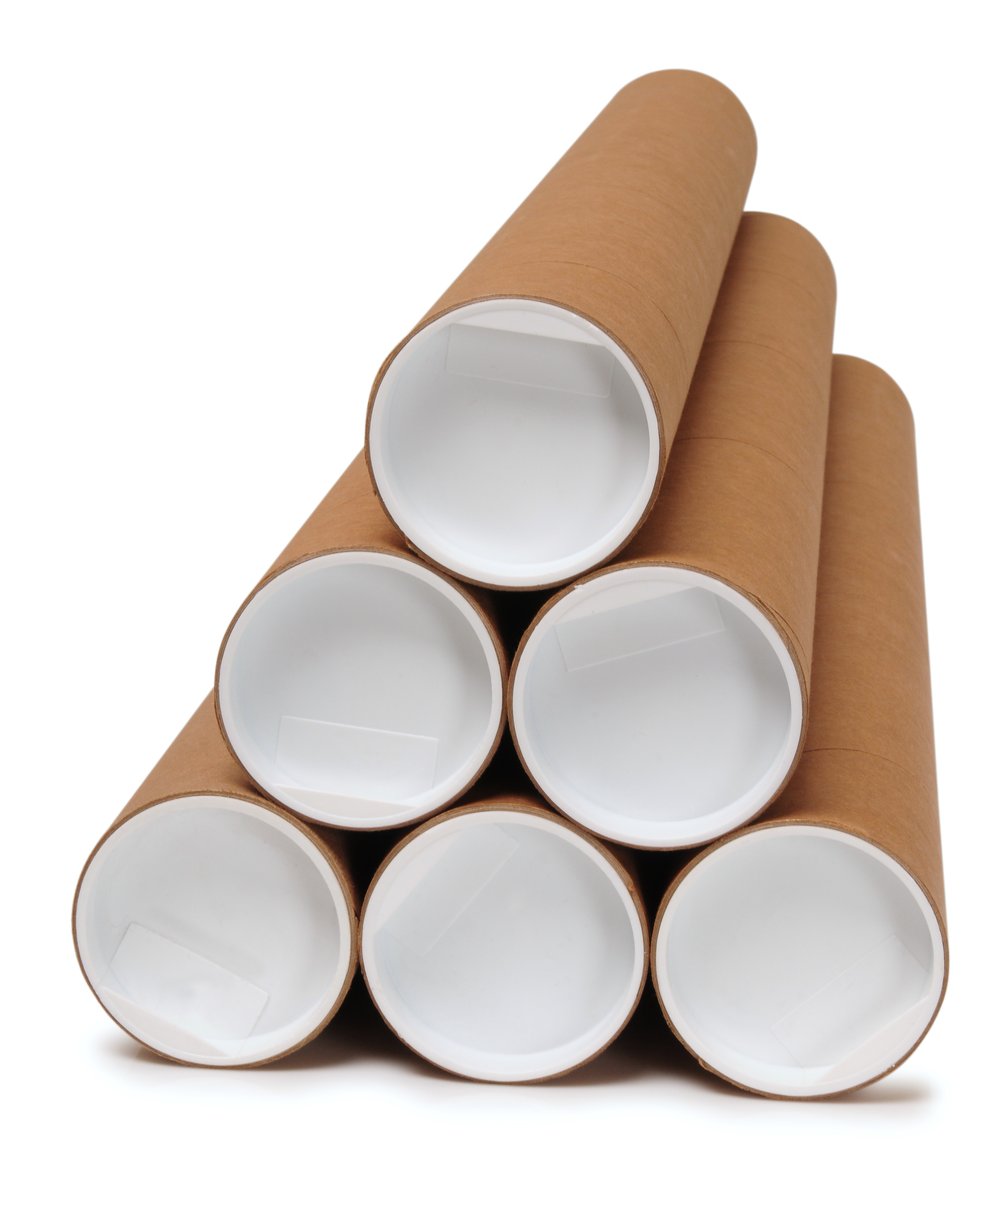 Makers of Mailing and Shipping Tubes — Heartland Products Group / Callenor  Company